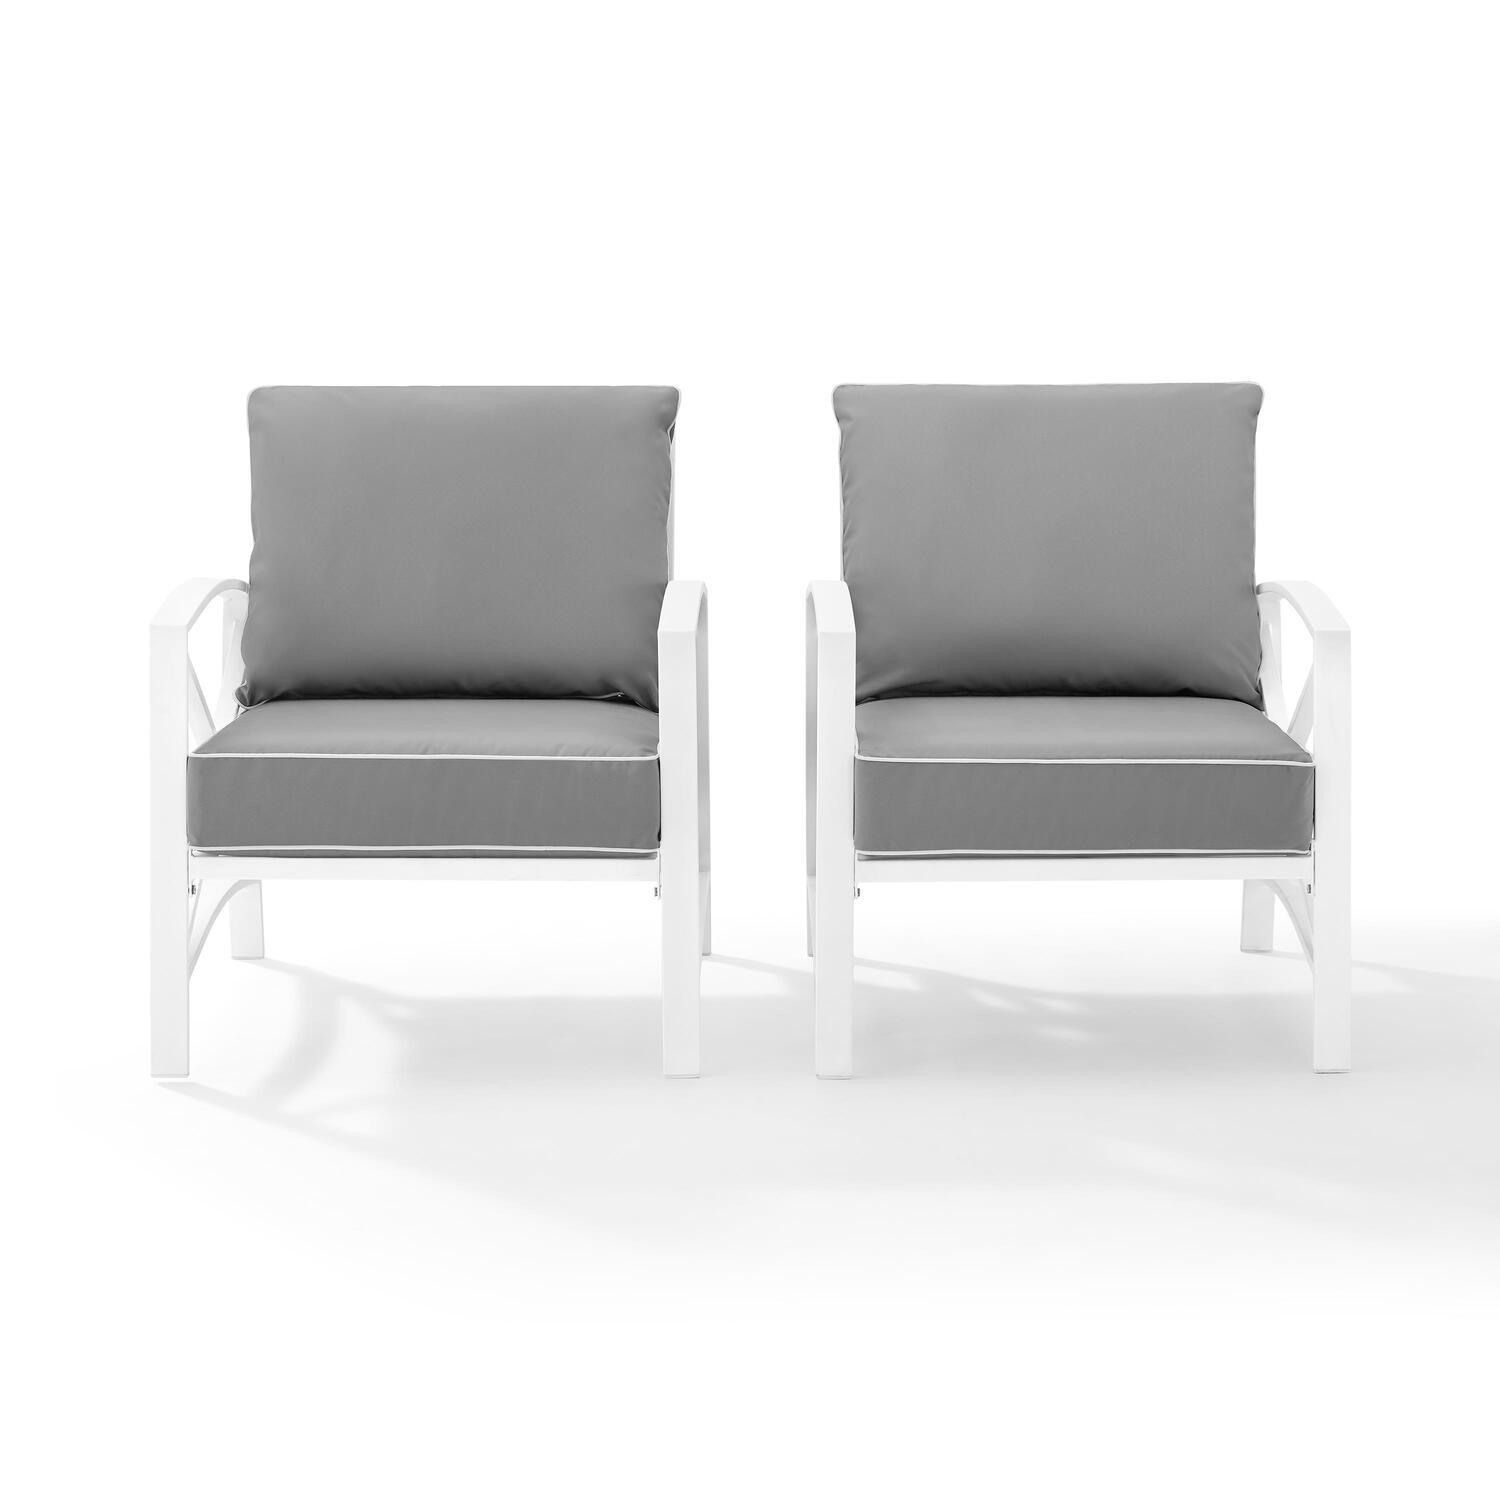 Crosley Kaplan Patio Arm Chair in Gray and White (Set of 2) - image 1 of 7